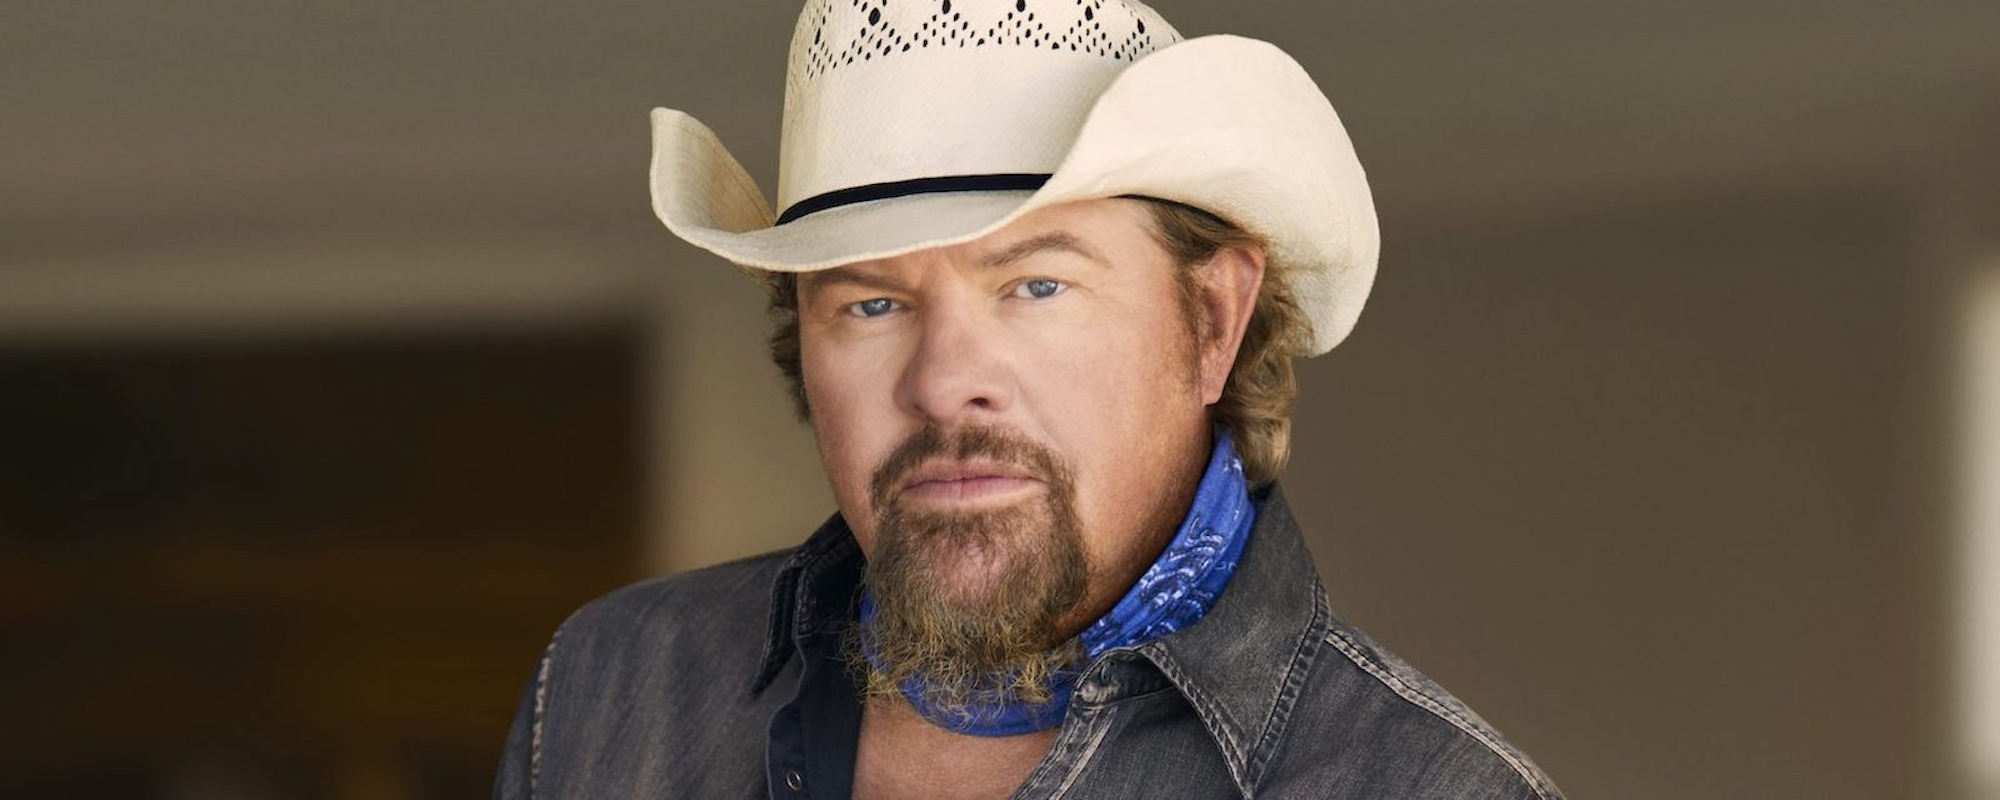 Toby Keith Declares “I’m Back,” Marks Return to Touring with New Las Vegas Shows